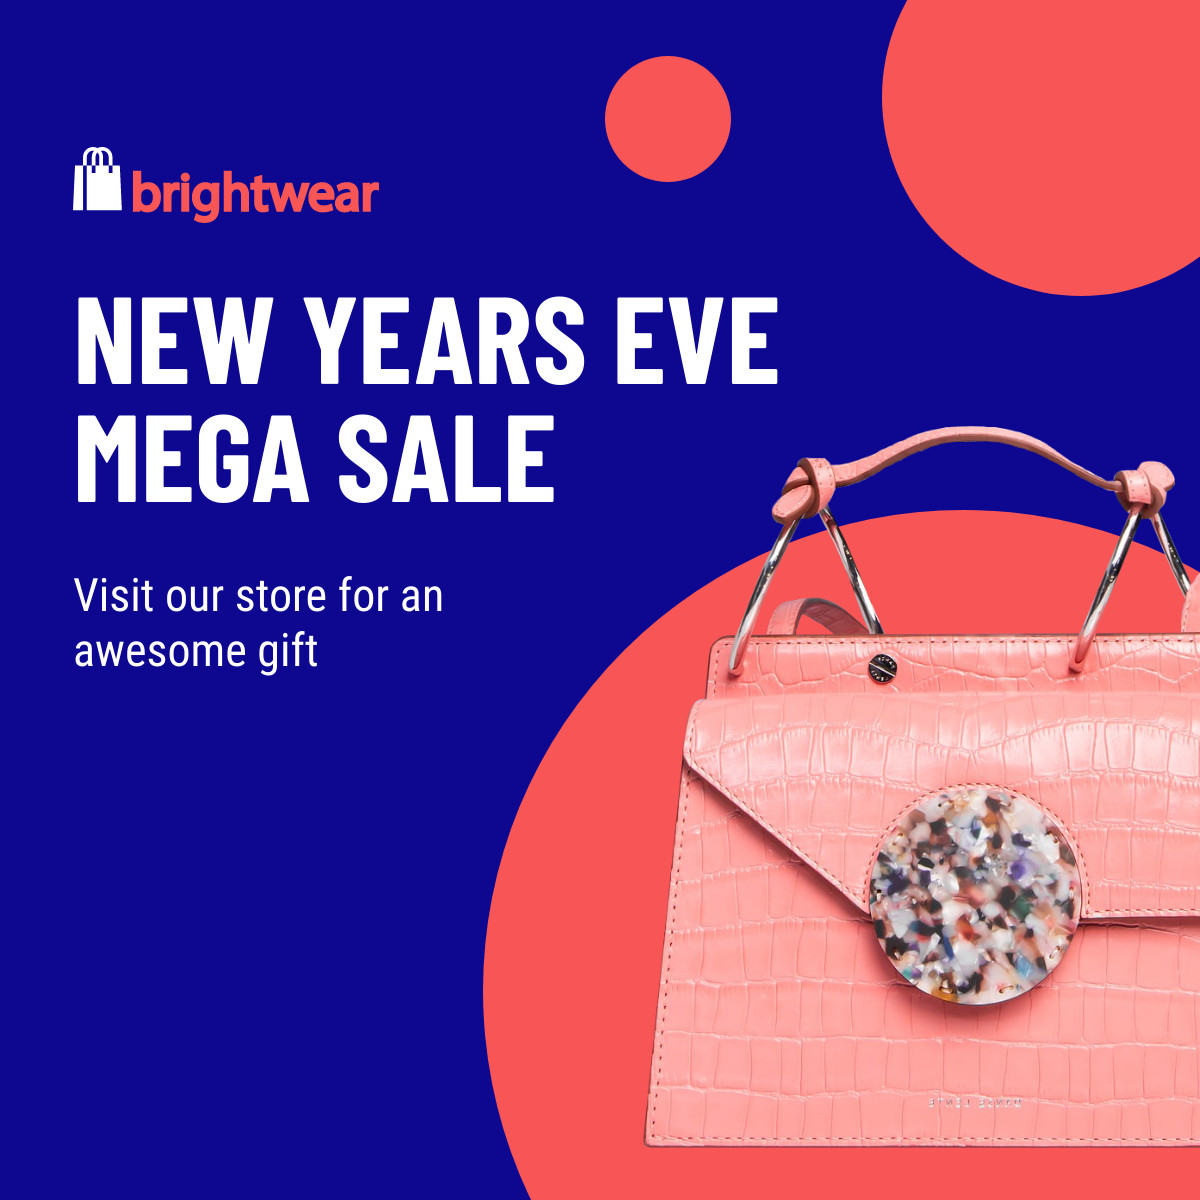 New Year Mega Sale with Awesome Gift Inline Rectangle 300x250